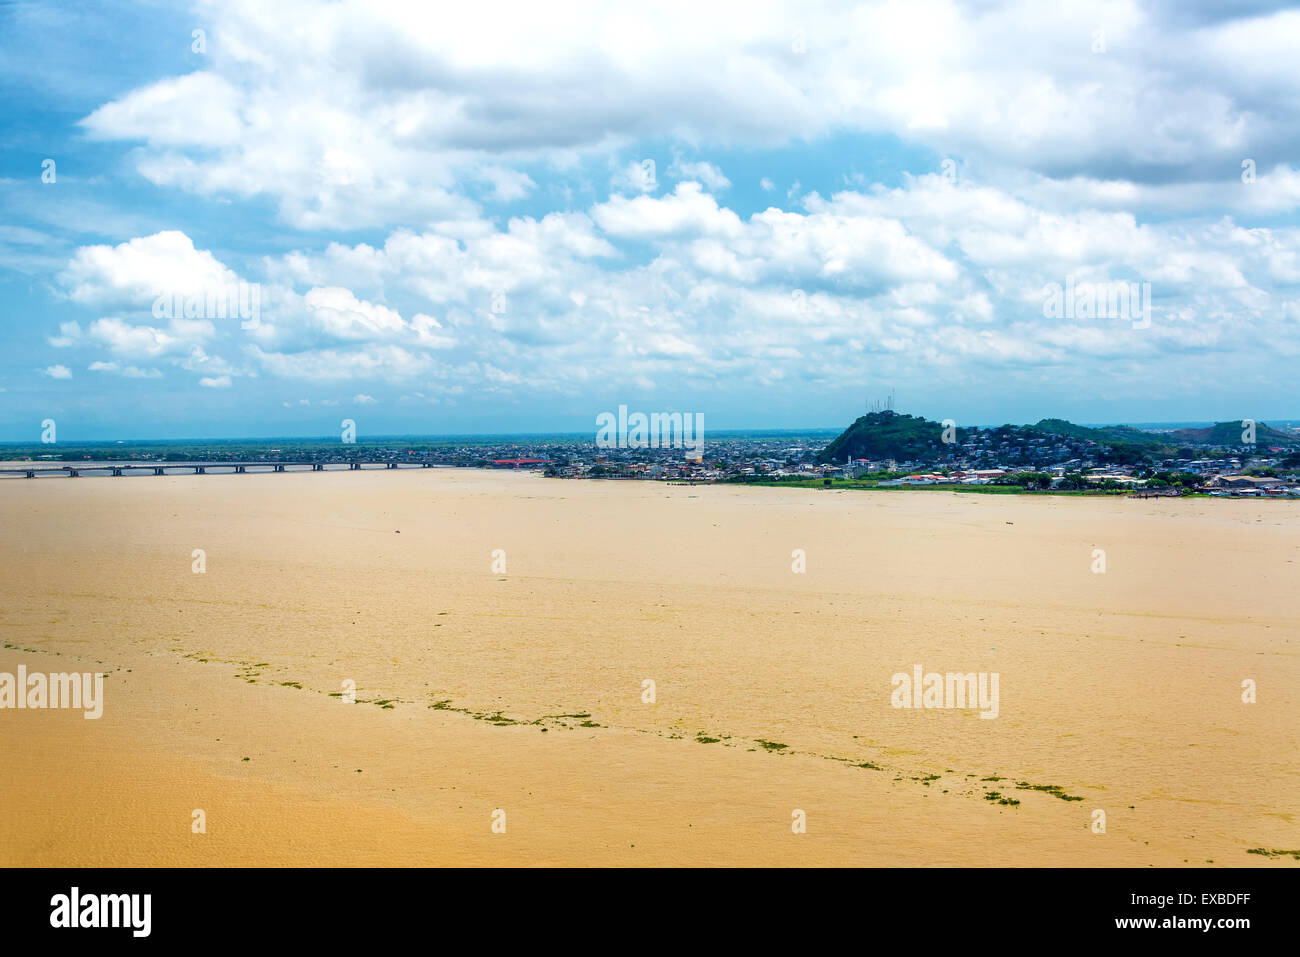 View of the Guayas River in Guayaquil, Ecuador Stock Photo